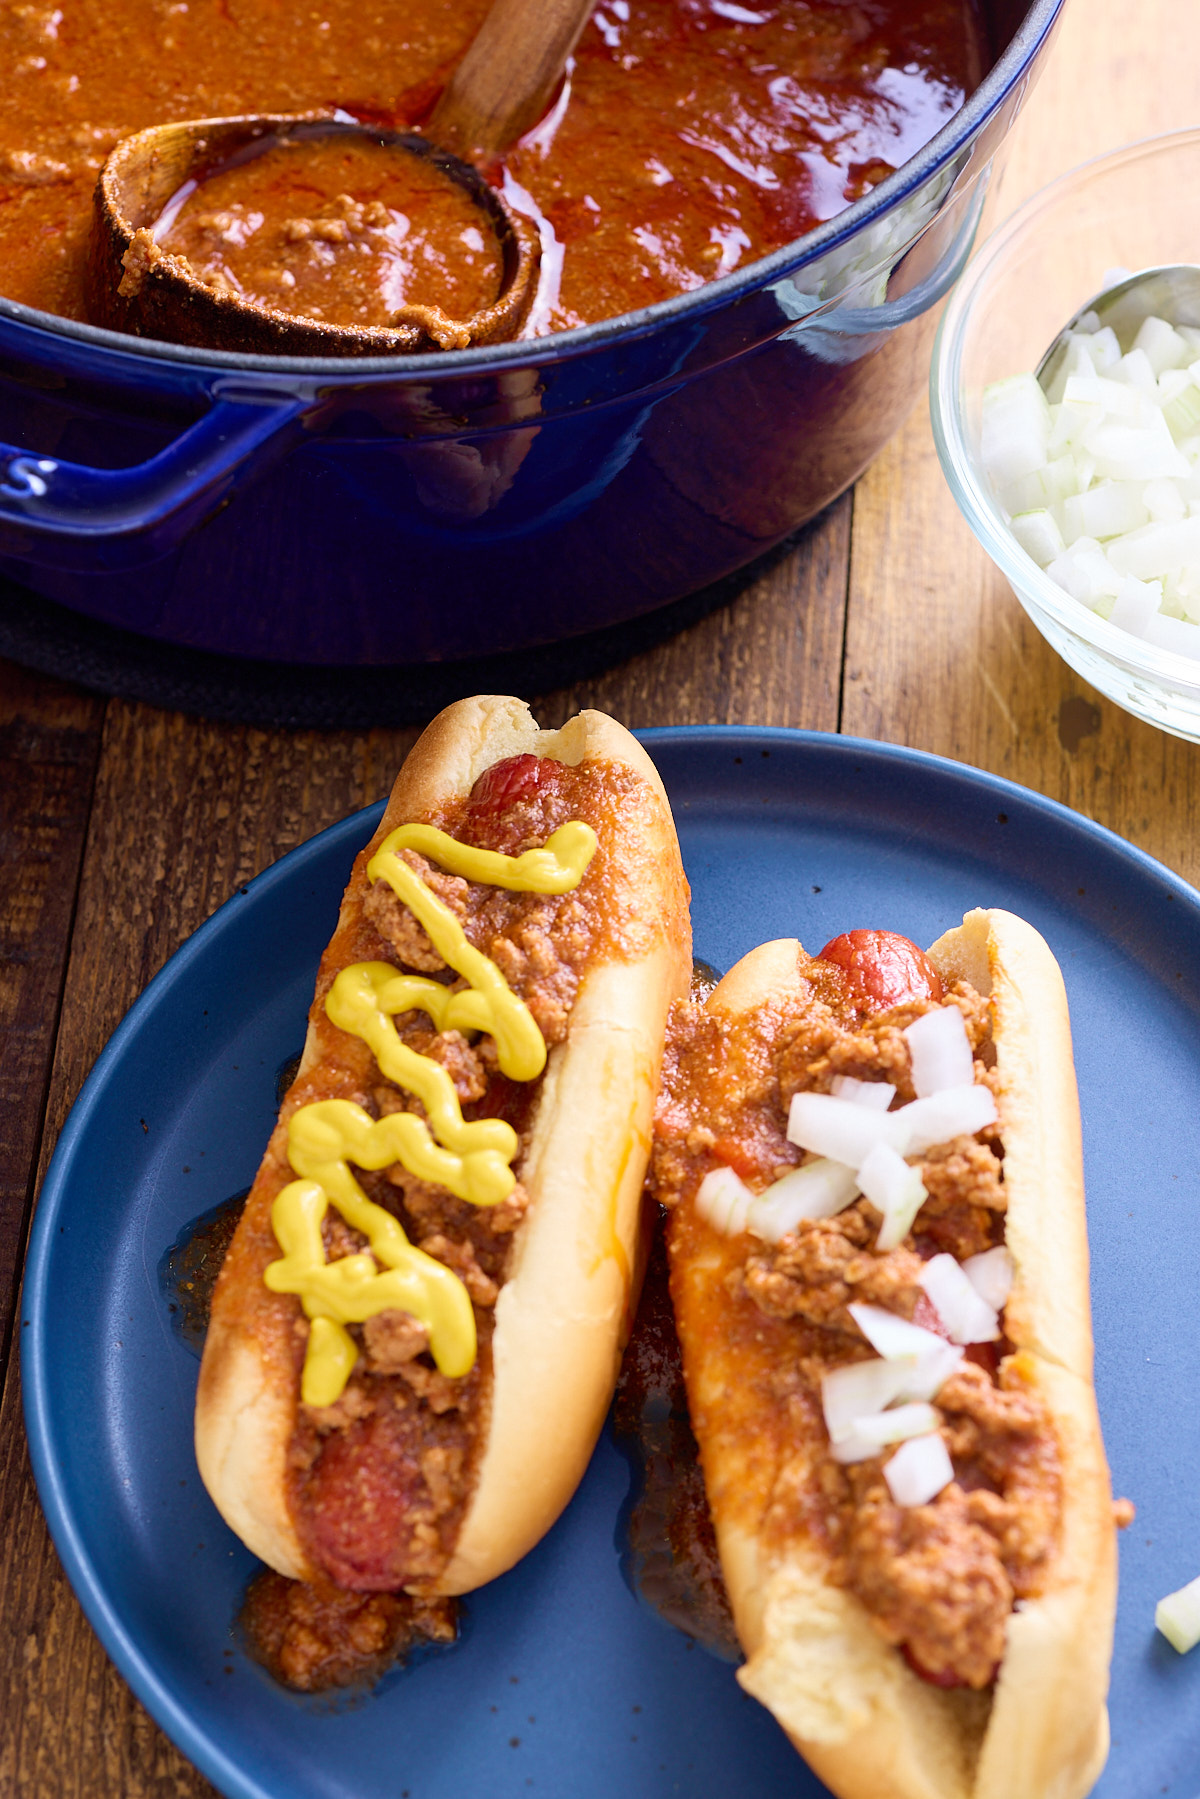 chili hot dogs with mustard and hot dogs on them with pot of hot dog chili in back